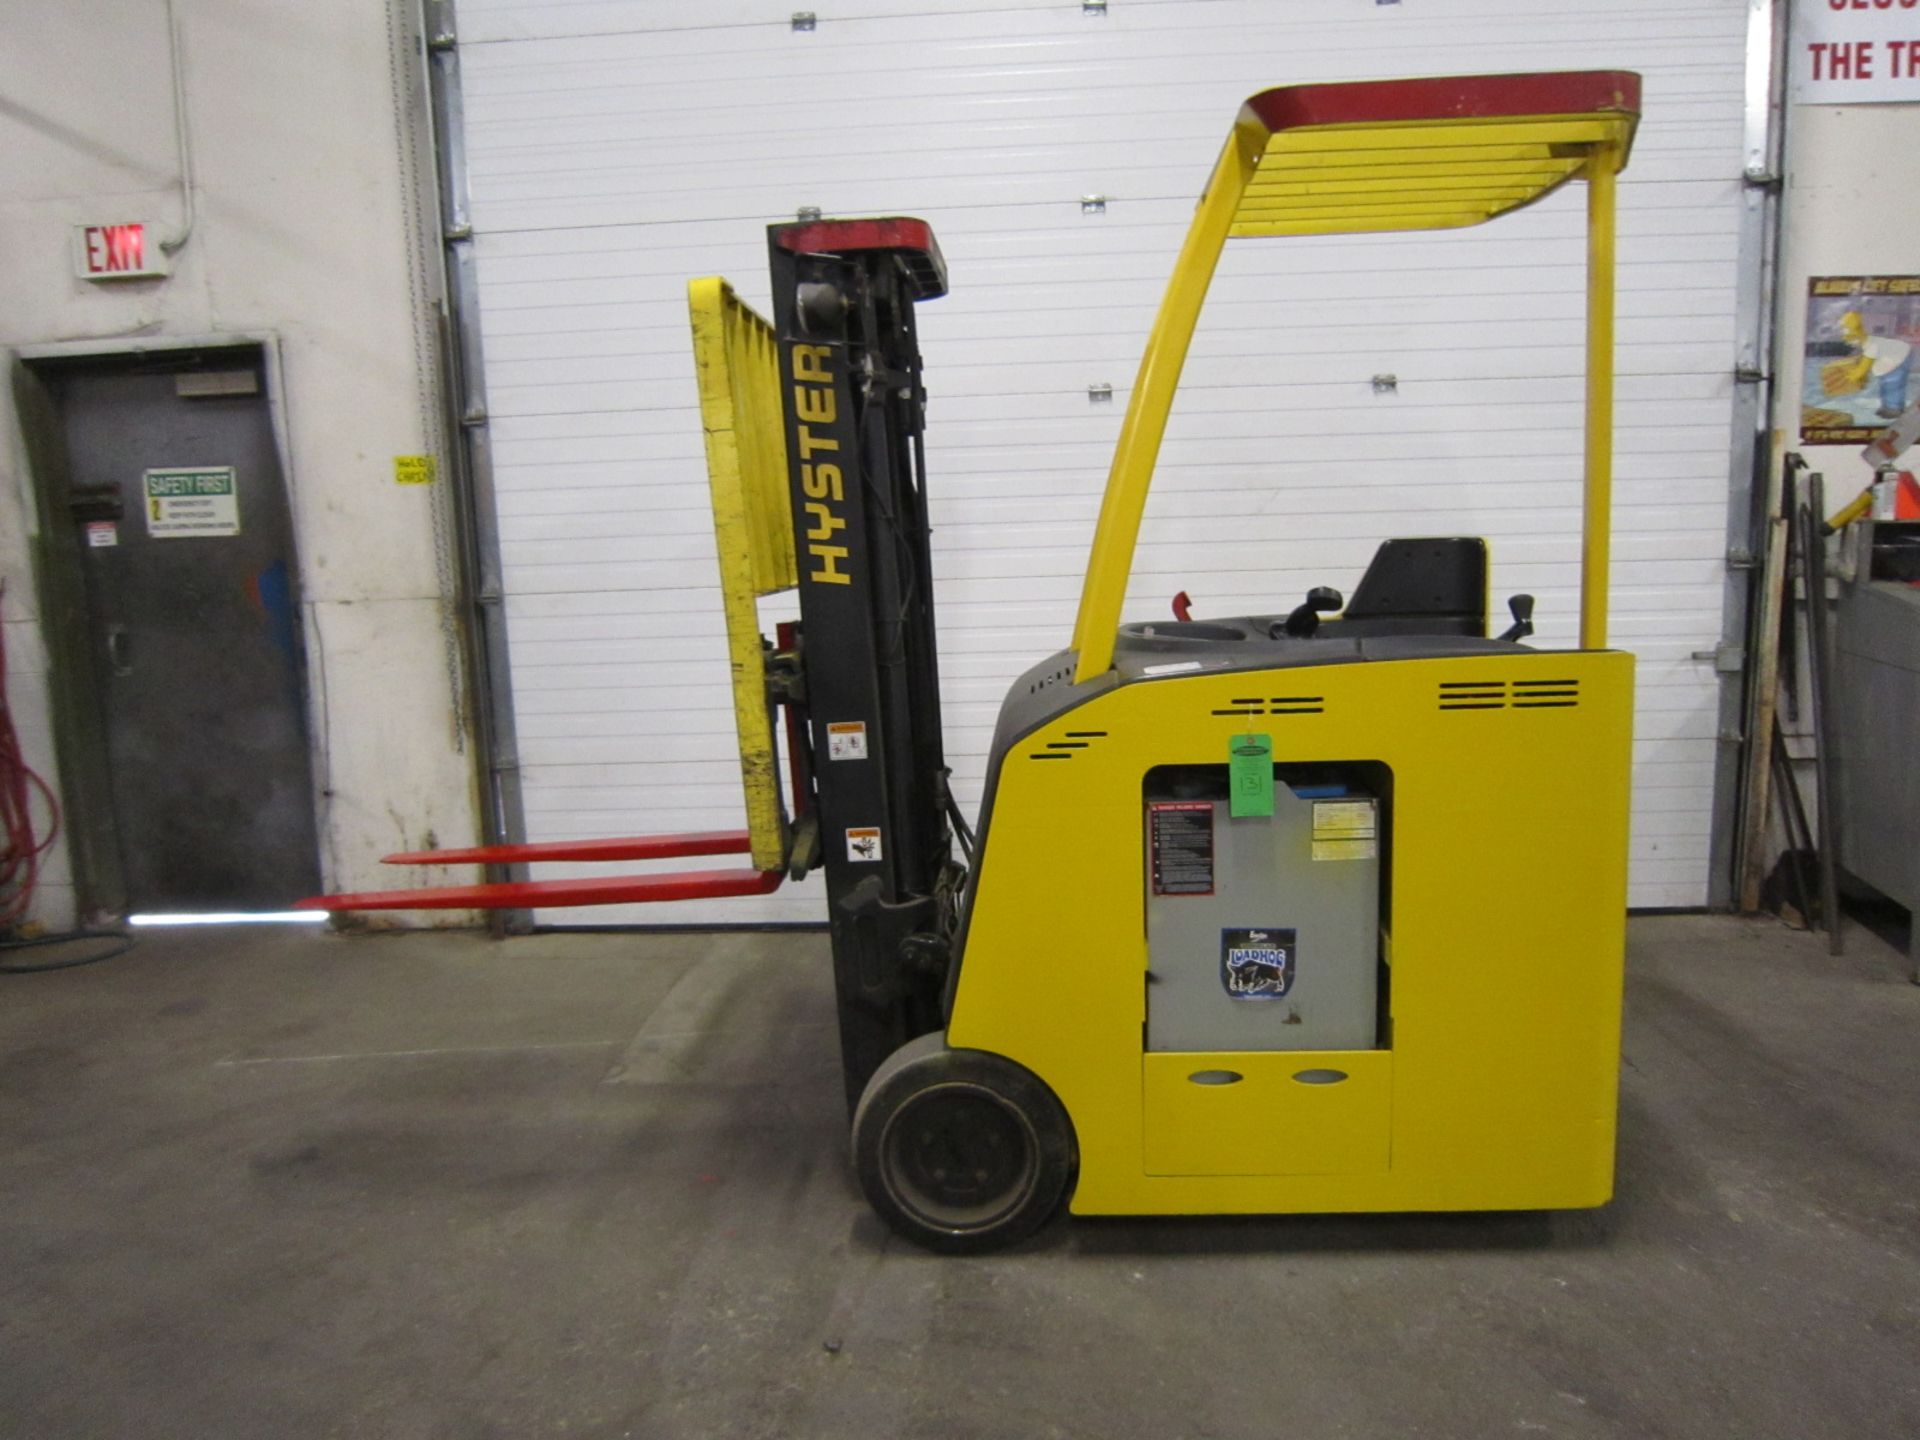 2003 Hyster model E30HSD 3000lbs Capacity Electric Rideon Lift Truck Stand-On Forklift with 3-